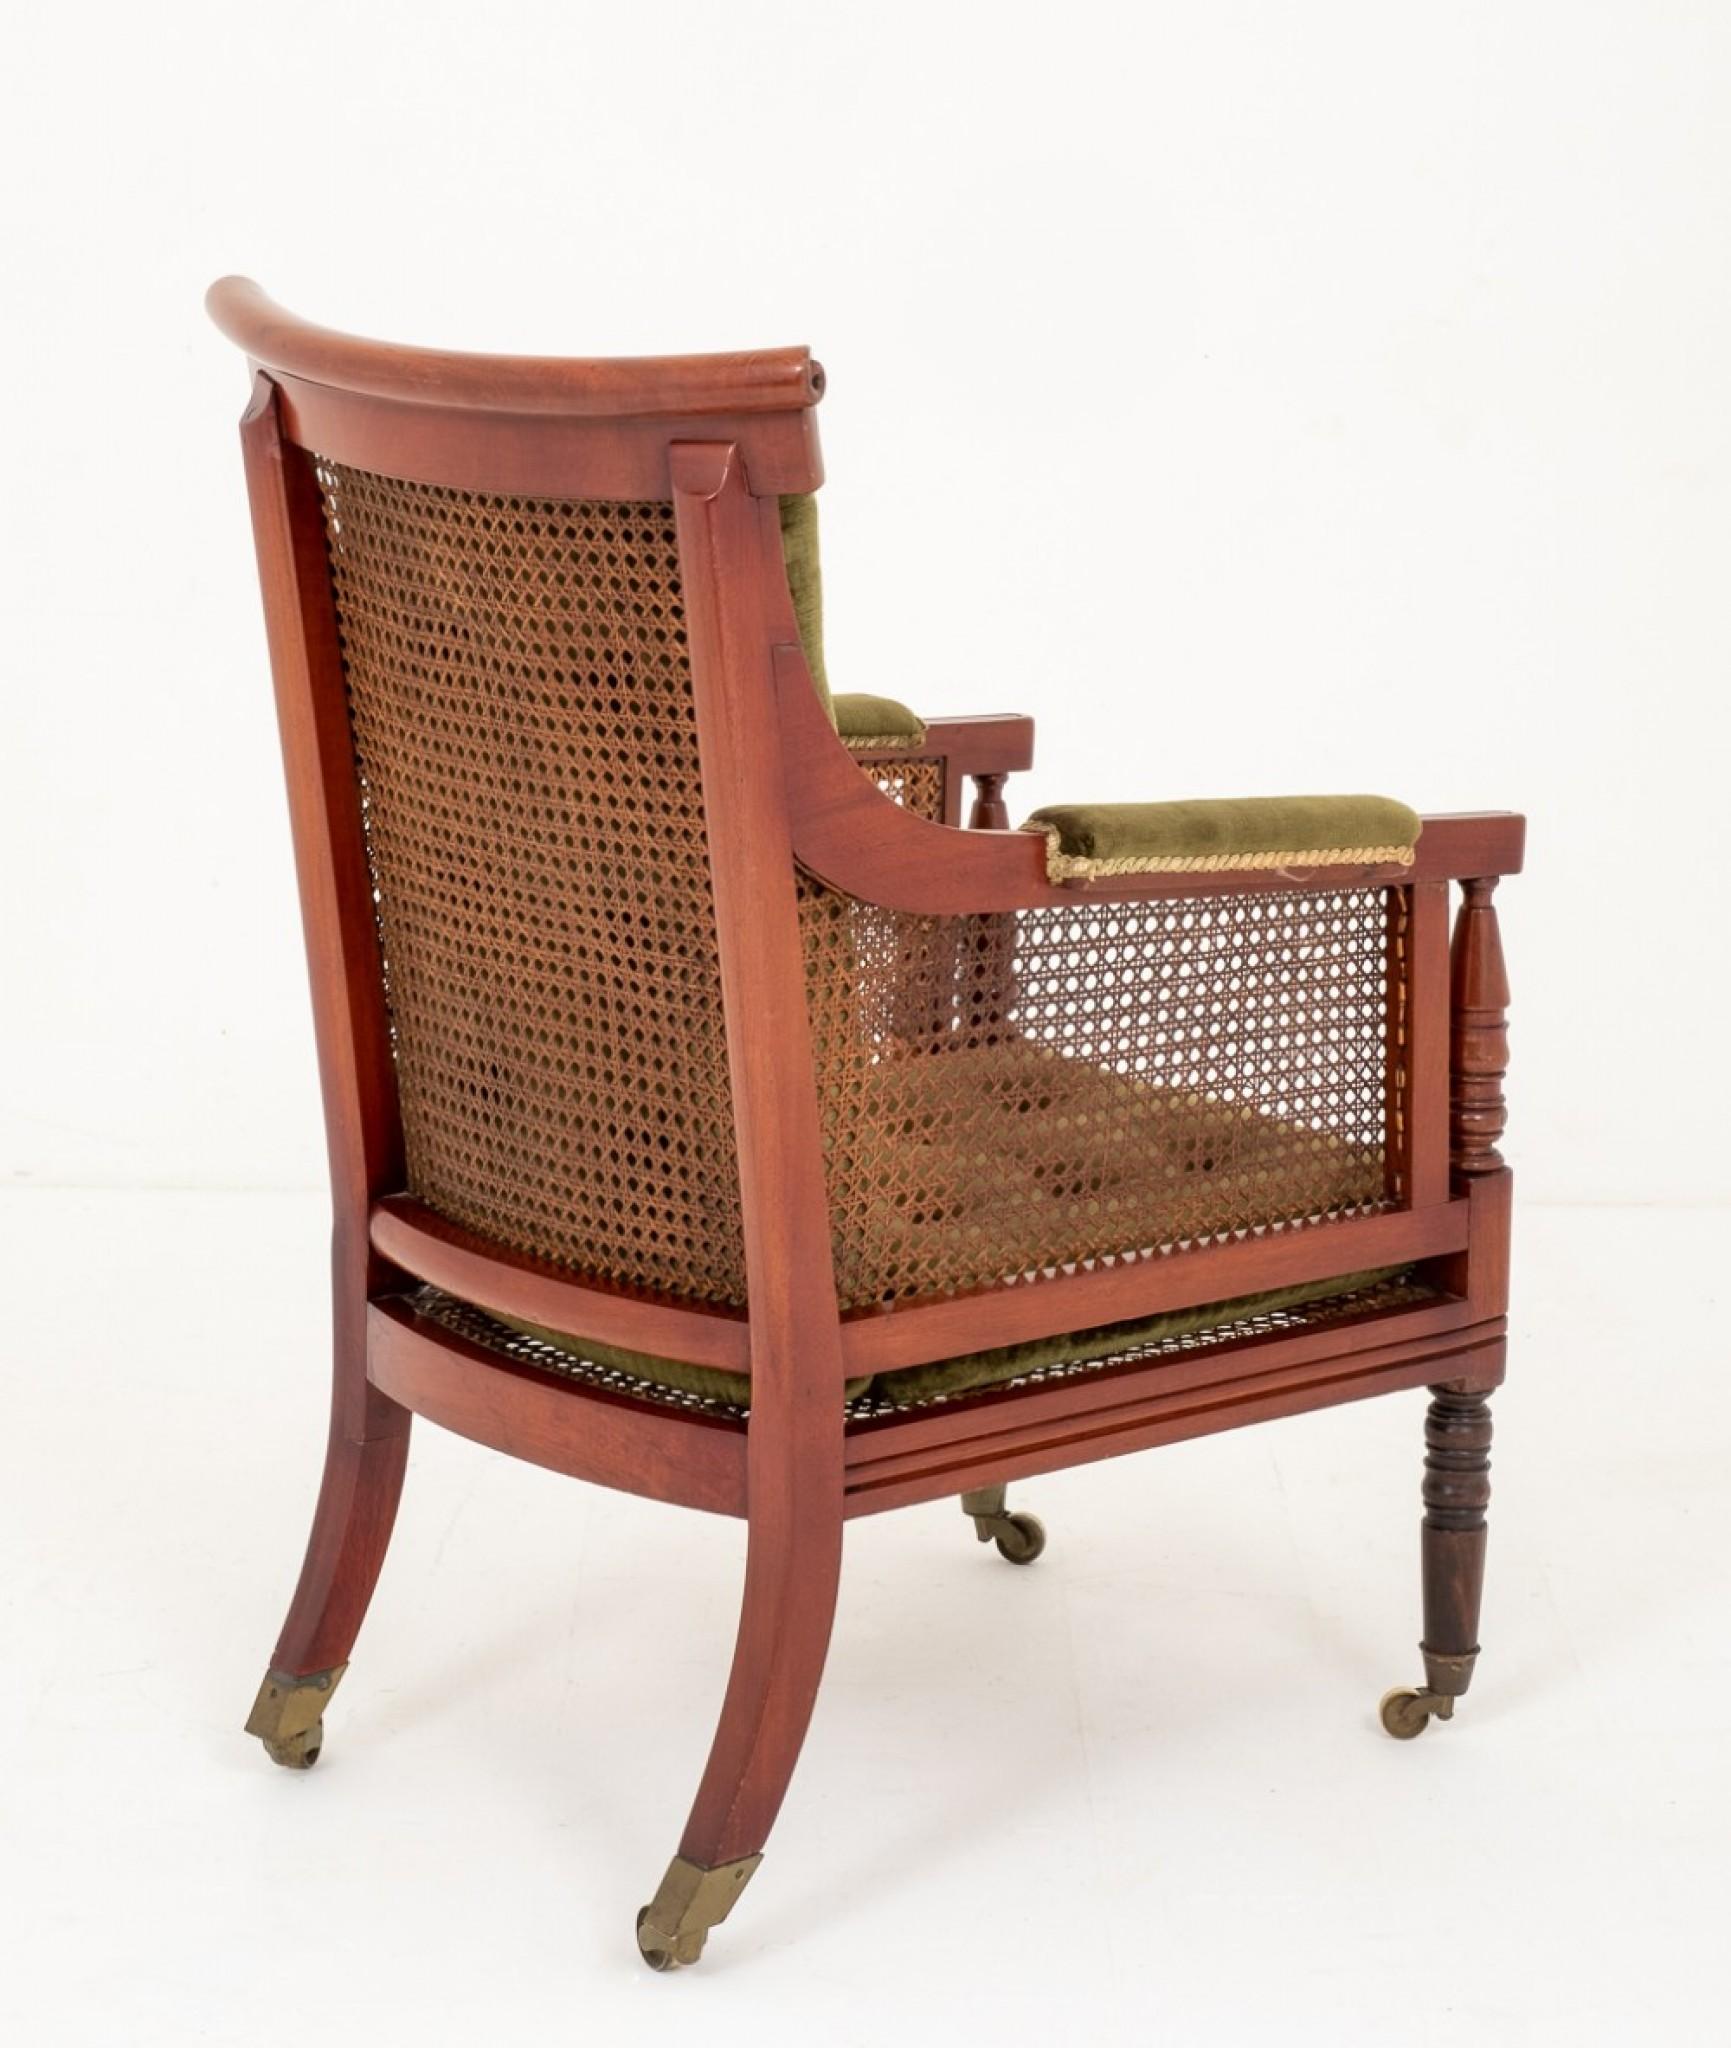 Impressive Mahogany William IV Bergere Chair.
19th century
Having Ring turned front legs with brass castors and sabre back legs.
Turned Arm supports and reeded Arms.
The Cresting rail being of a shaped form.
In good condition with lift out